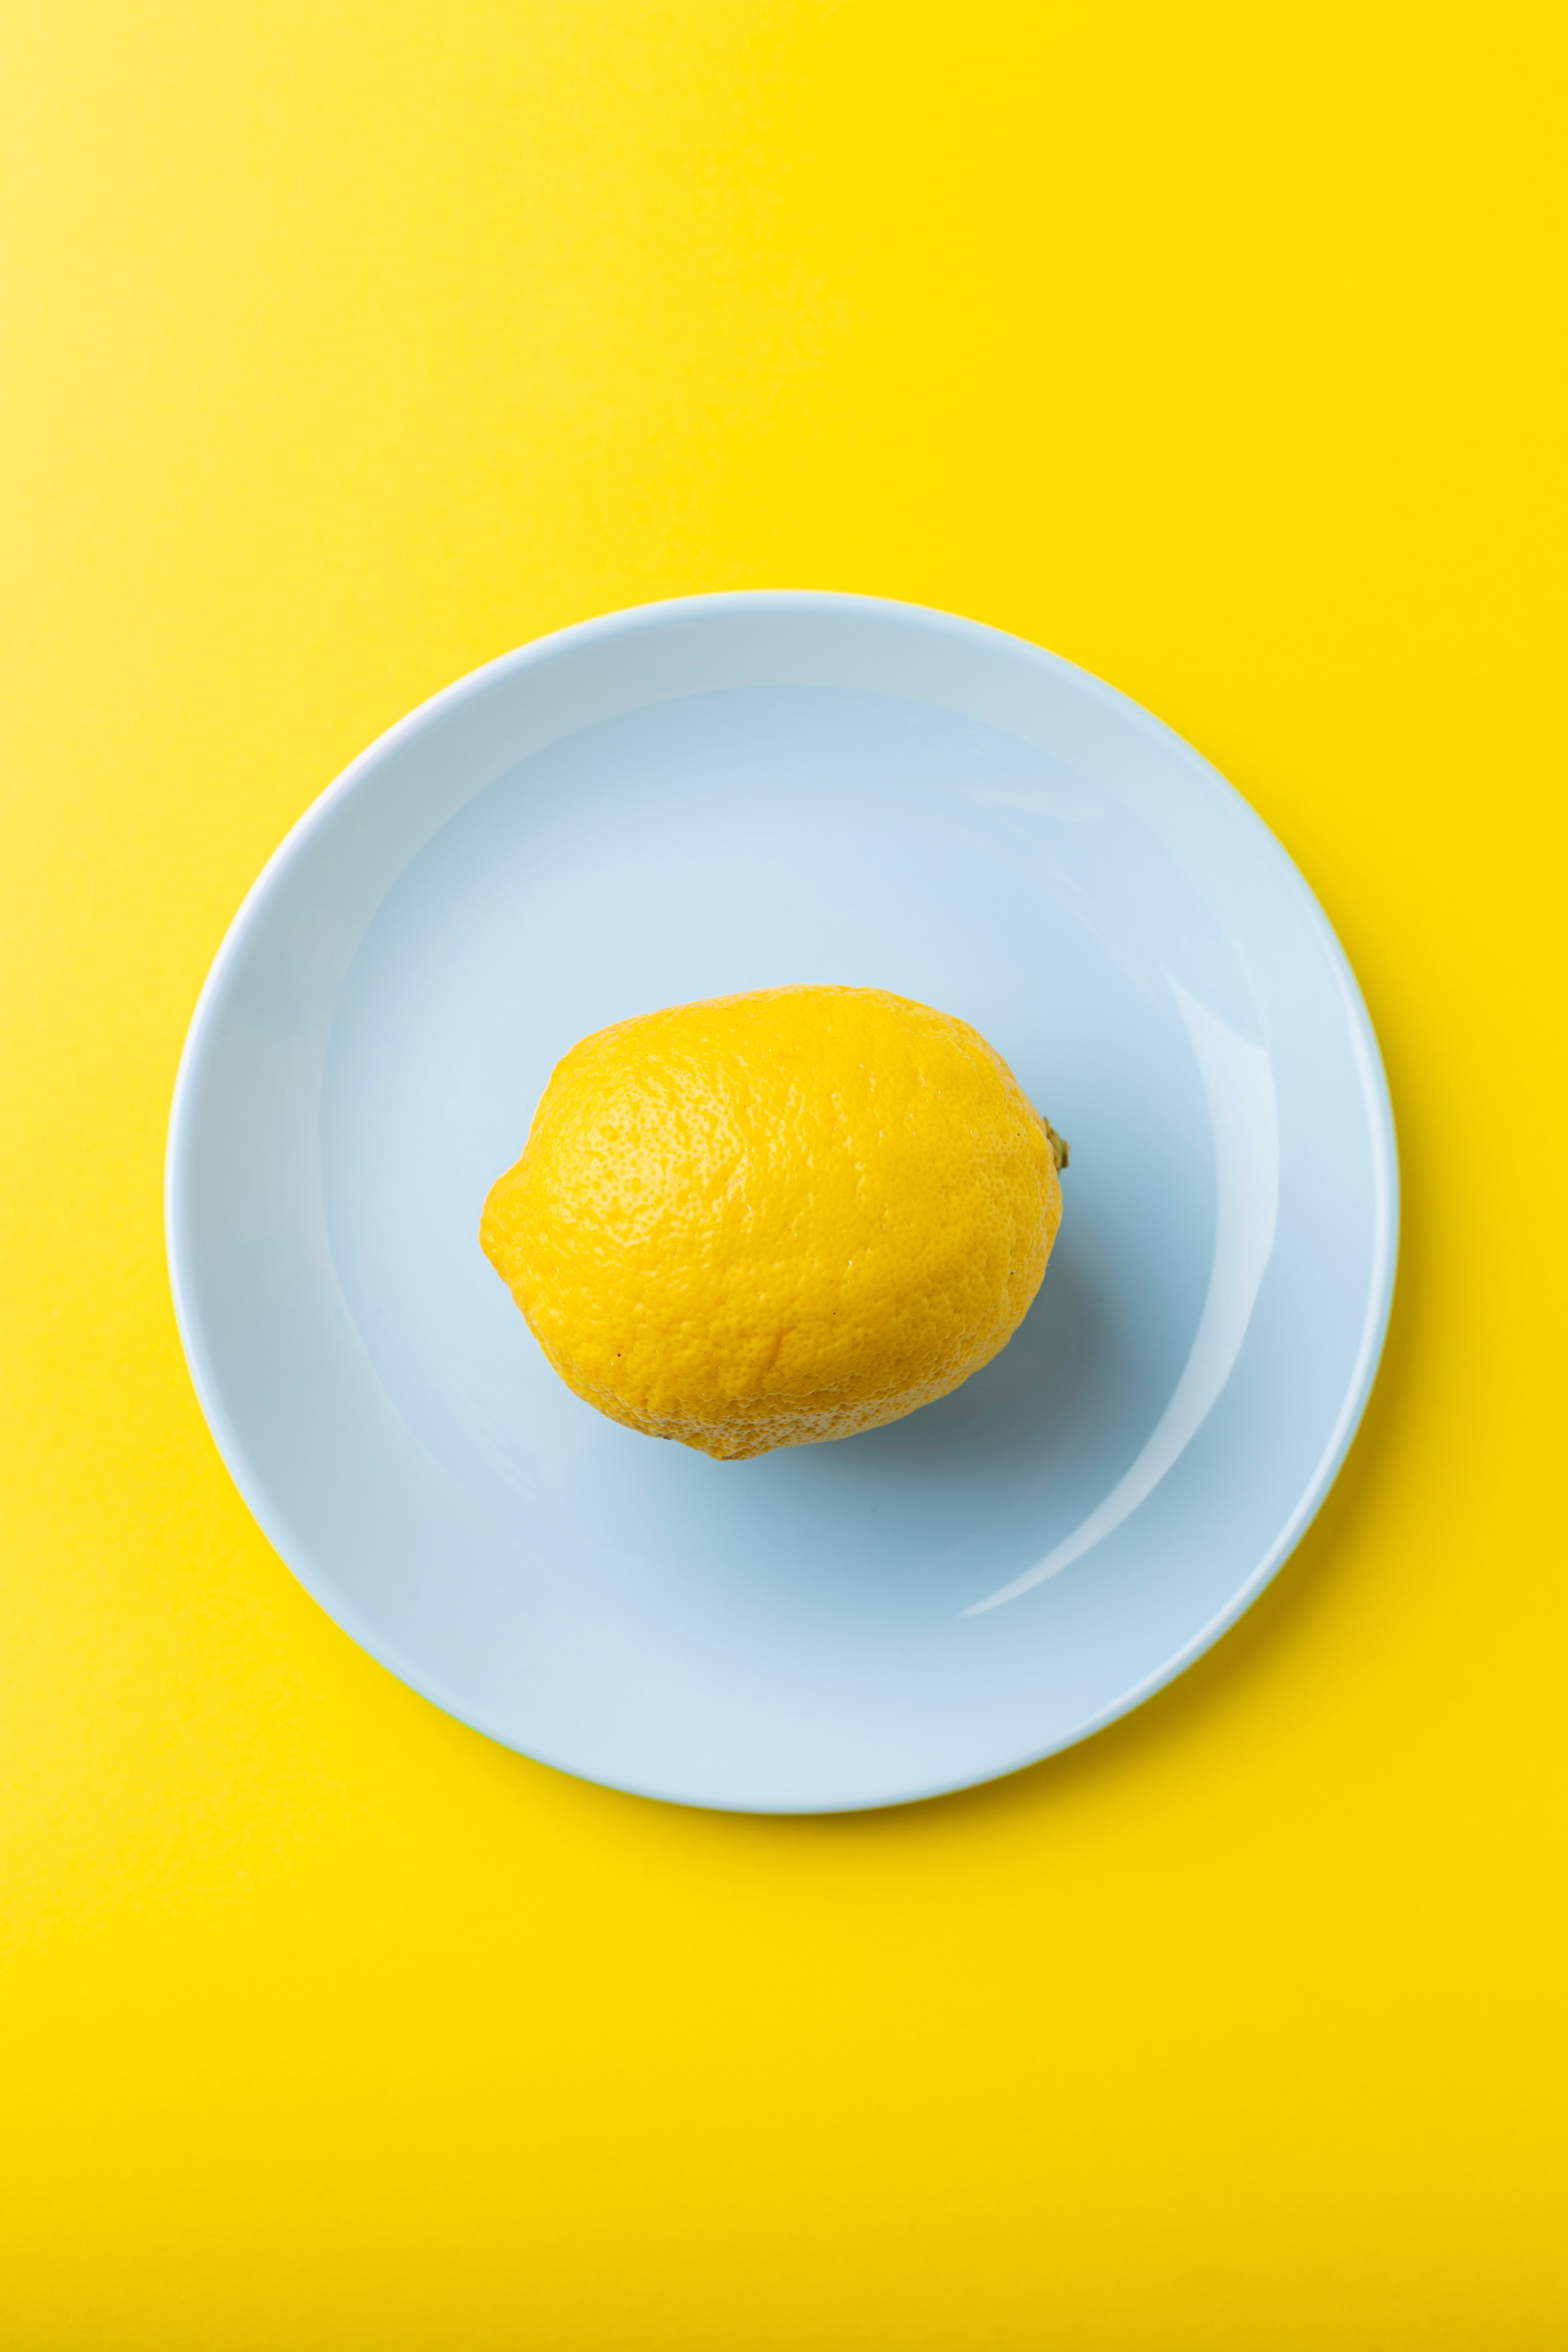 98679 Screensavers and Wallpapers Lemon for phone. Download food, yellow, minimalism, lemon, fruit, citrus pictures for free